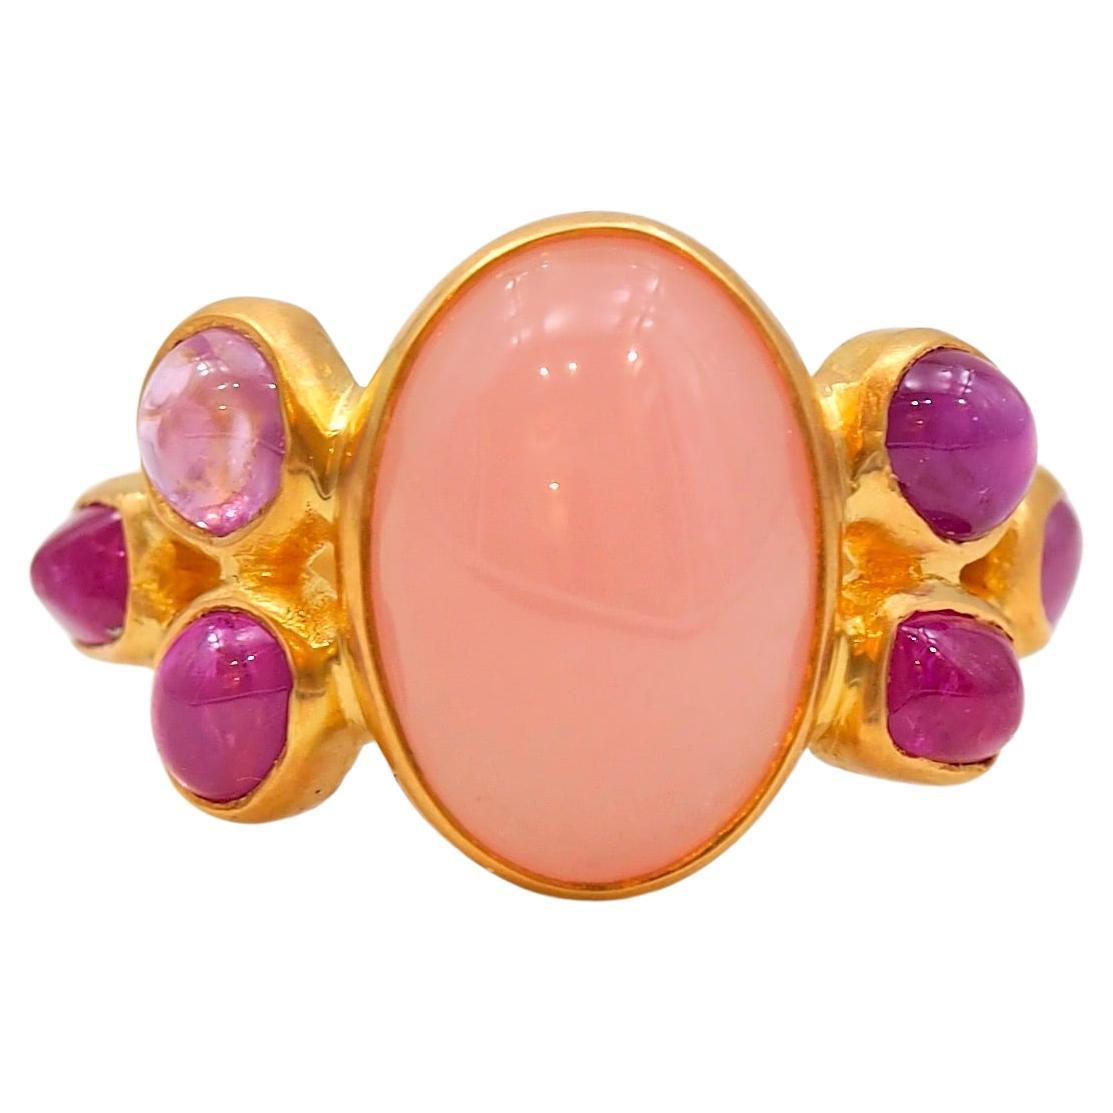 Scrives 5.25 Ct Peach Chalcedony 3.06 Ct Pink sapphire Cabochon 22 Kt Gold Ring For Sale